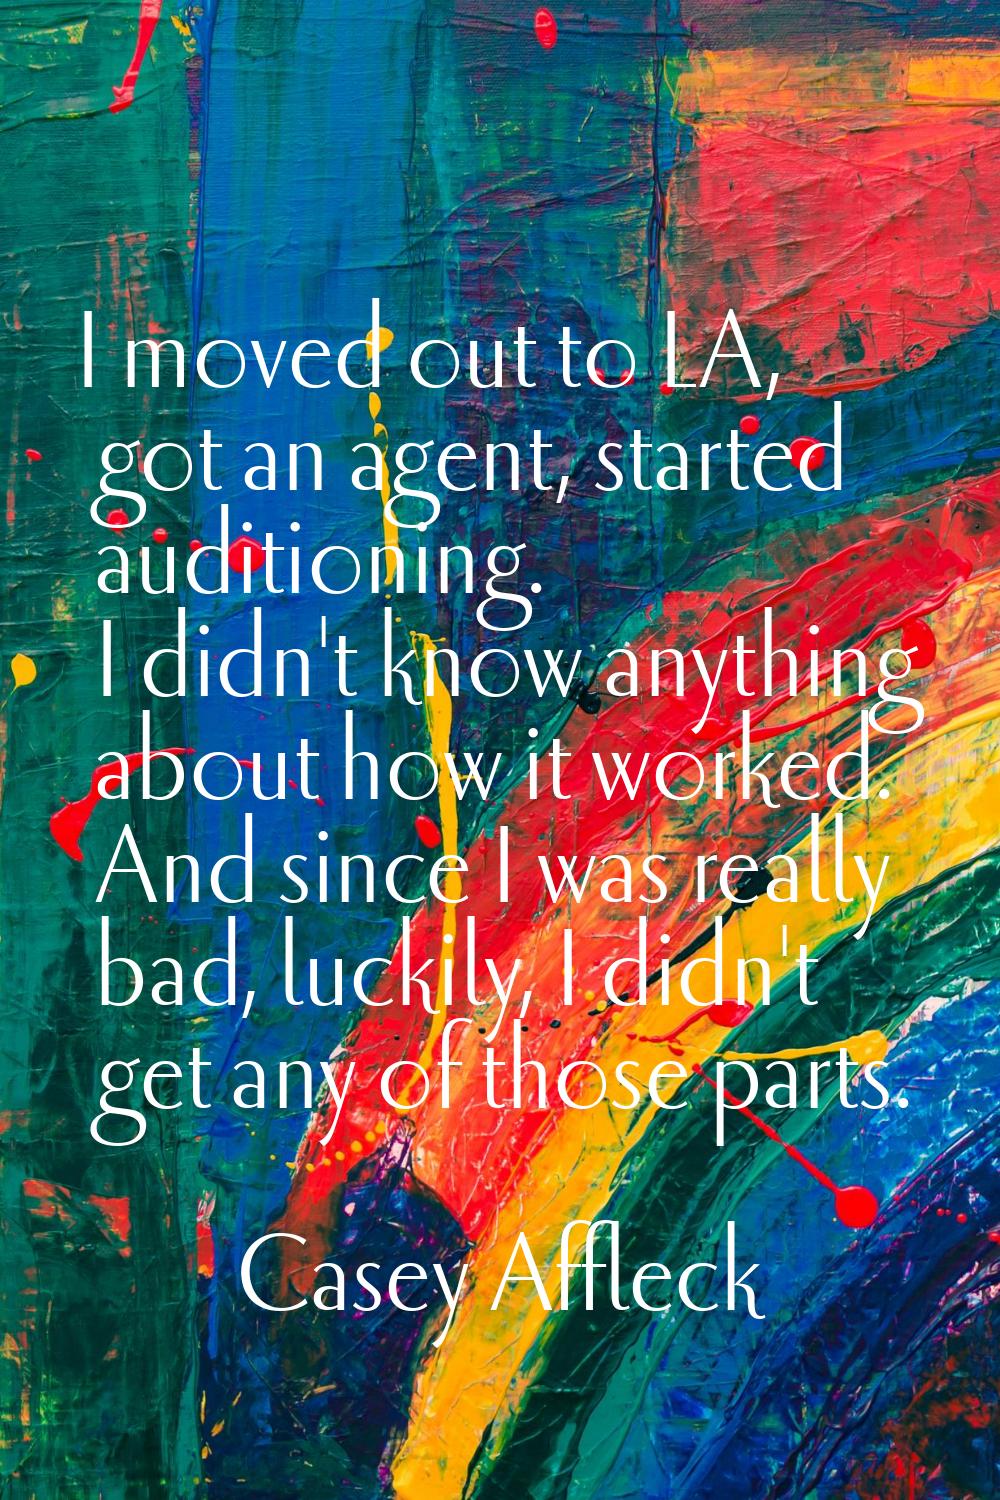 I moved out to LA, got an agent, started auditioning. I didn't know anything about how it worked. A